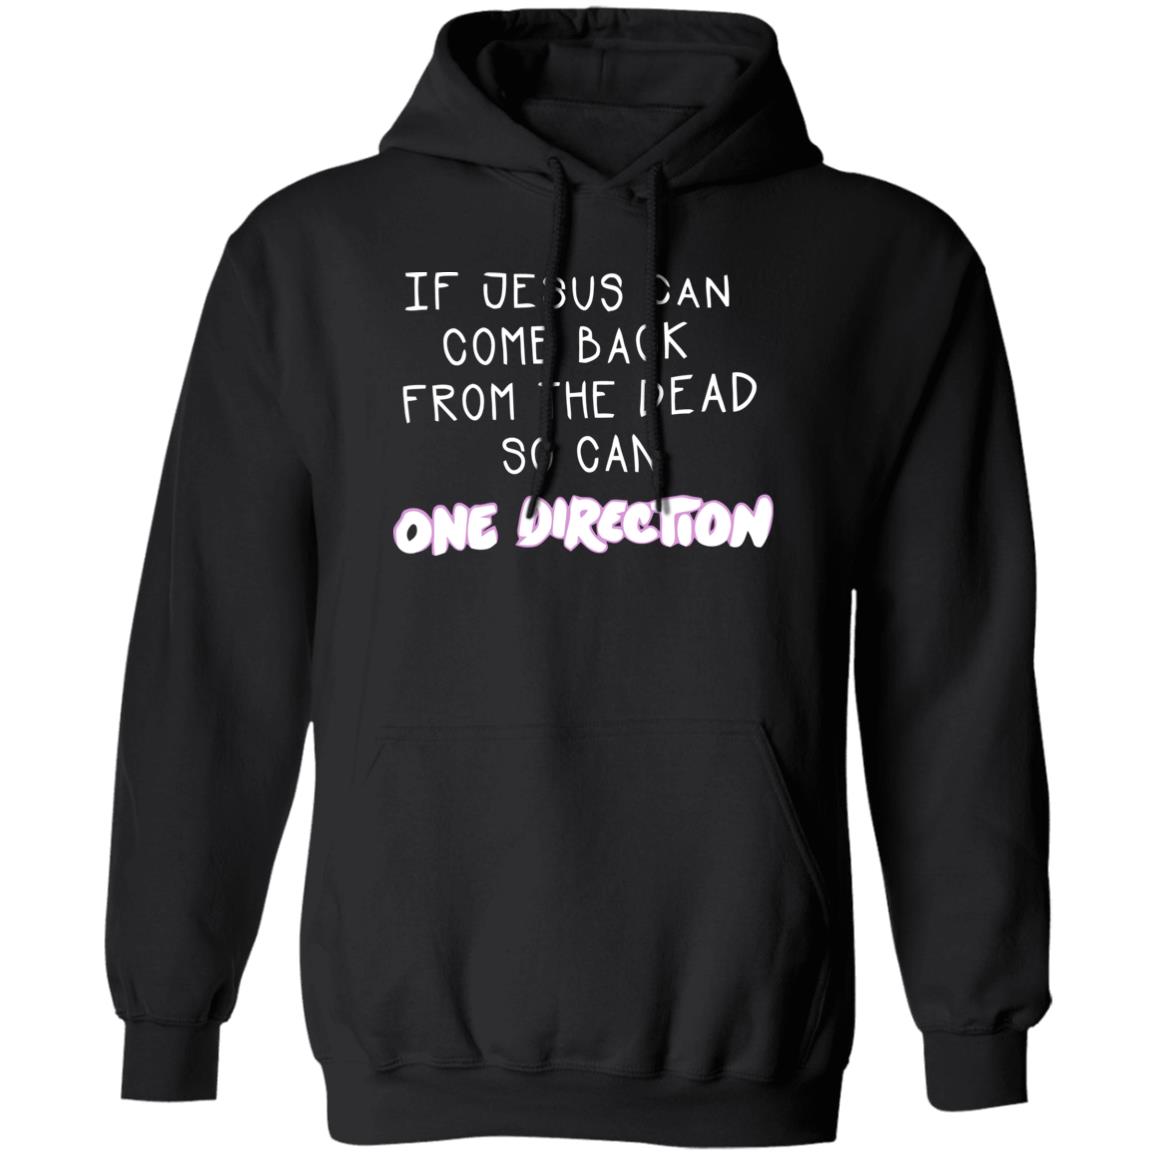 If Jesus Can Come Back From The Dead So Can One Direction Shirt 1